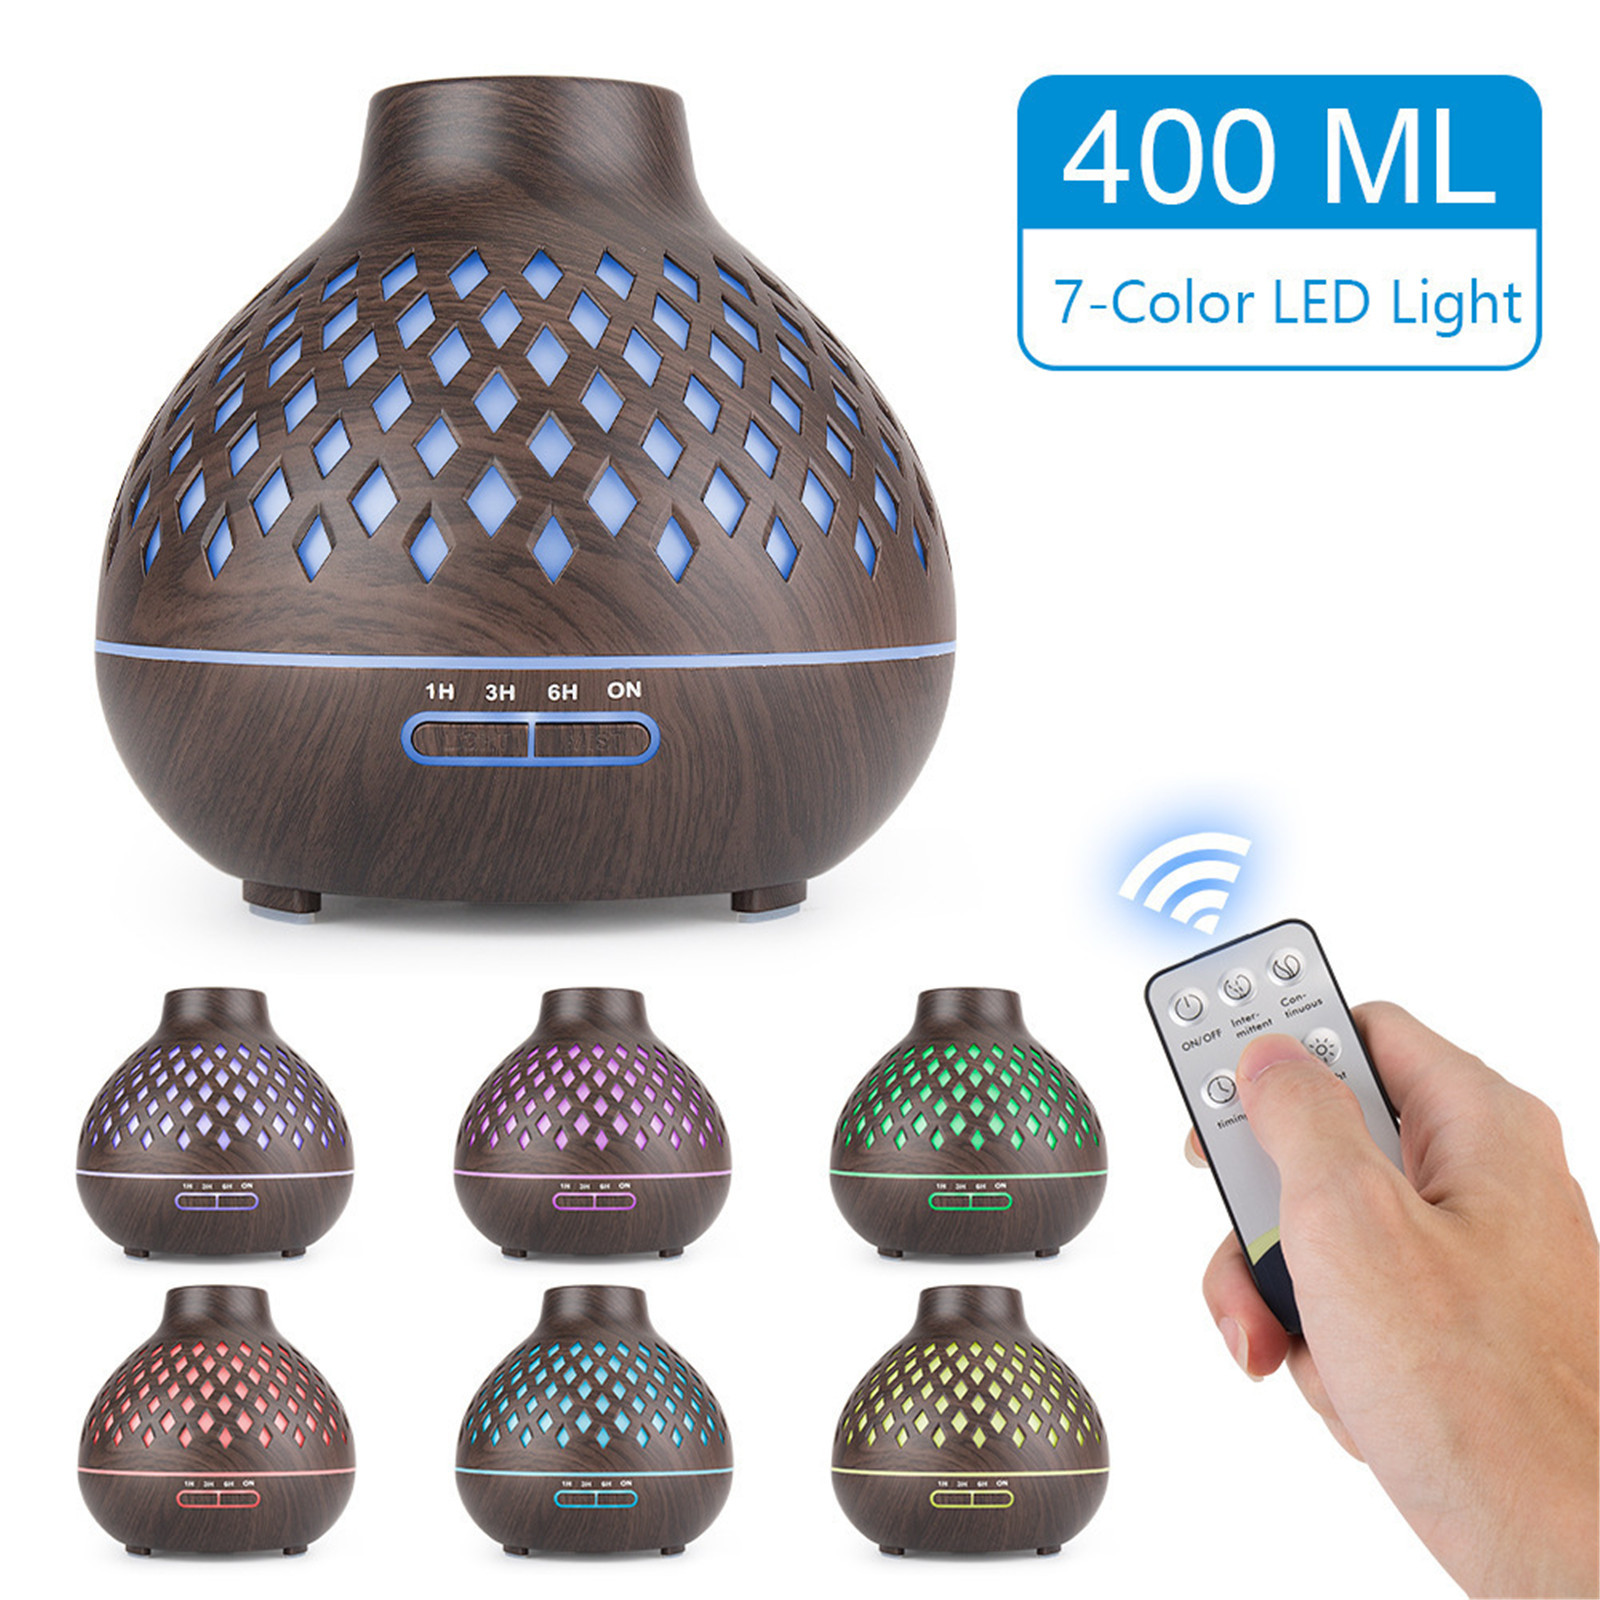 jovati Aroma Diffusers for Essential Oils Aroma Diffuser Auto Shut Off,  400Ml Essential Oil Diffuser with Diamond-Shaped D Fall Essential Oils for  Diffuser Oil for Diffuser Essential Oils 